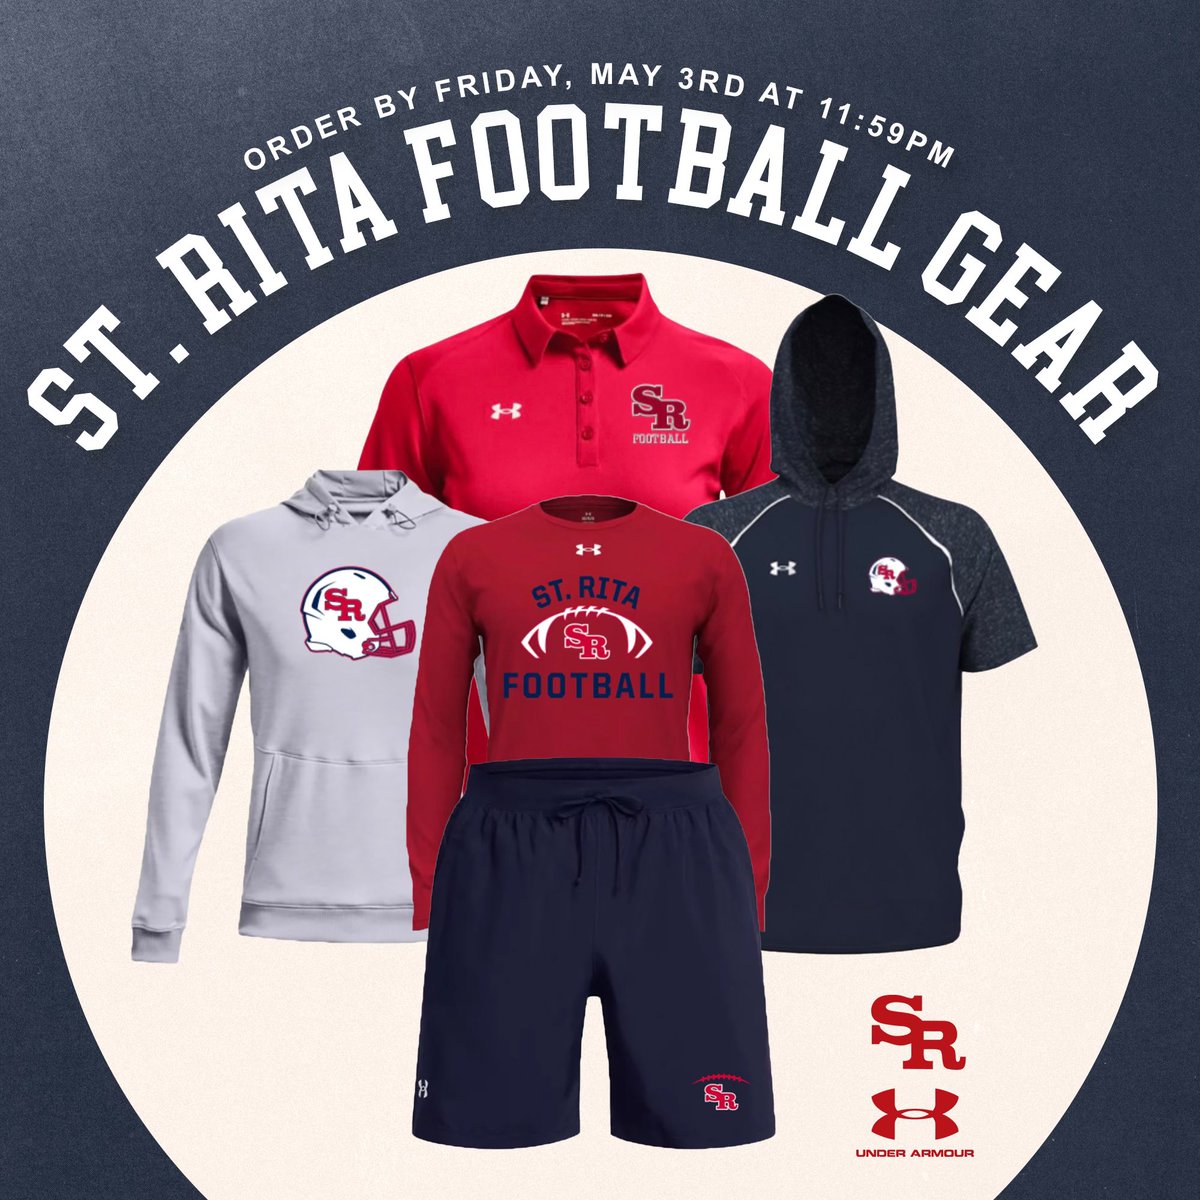 The St. Rita Football Online Store closes tomorrow 5/3 at midnight. Click the link below to get your gear for the upcoming Football season. #Mustangs bsnteamsports.com/shop/2FzMKyQgR…